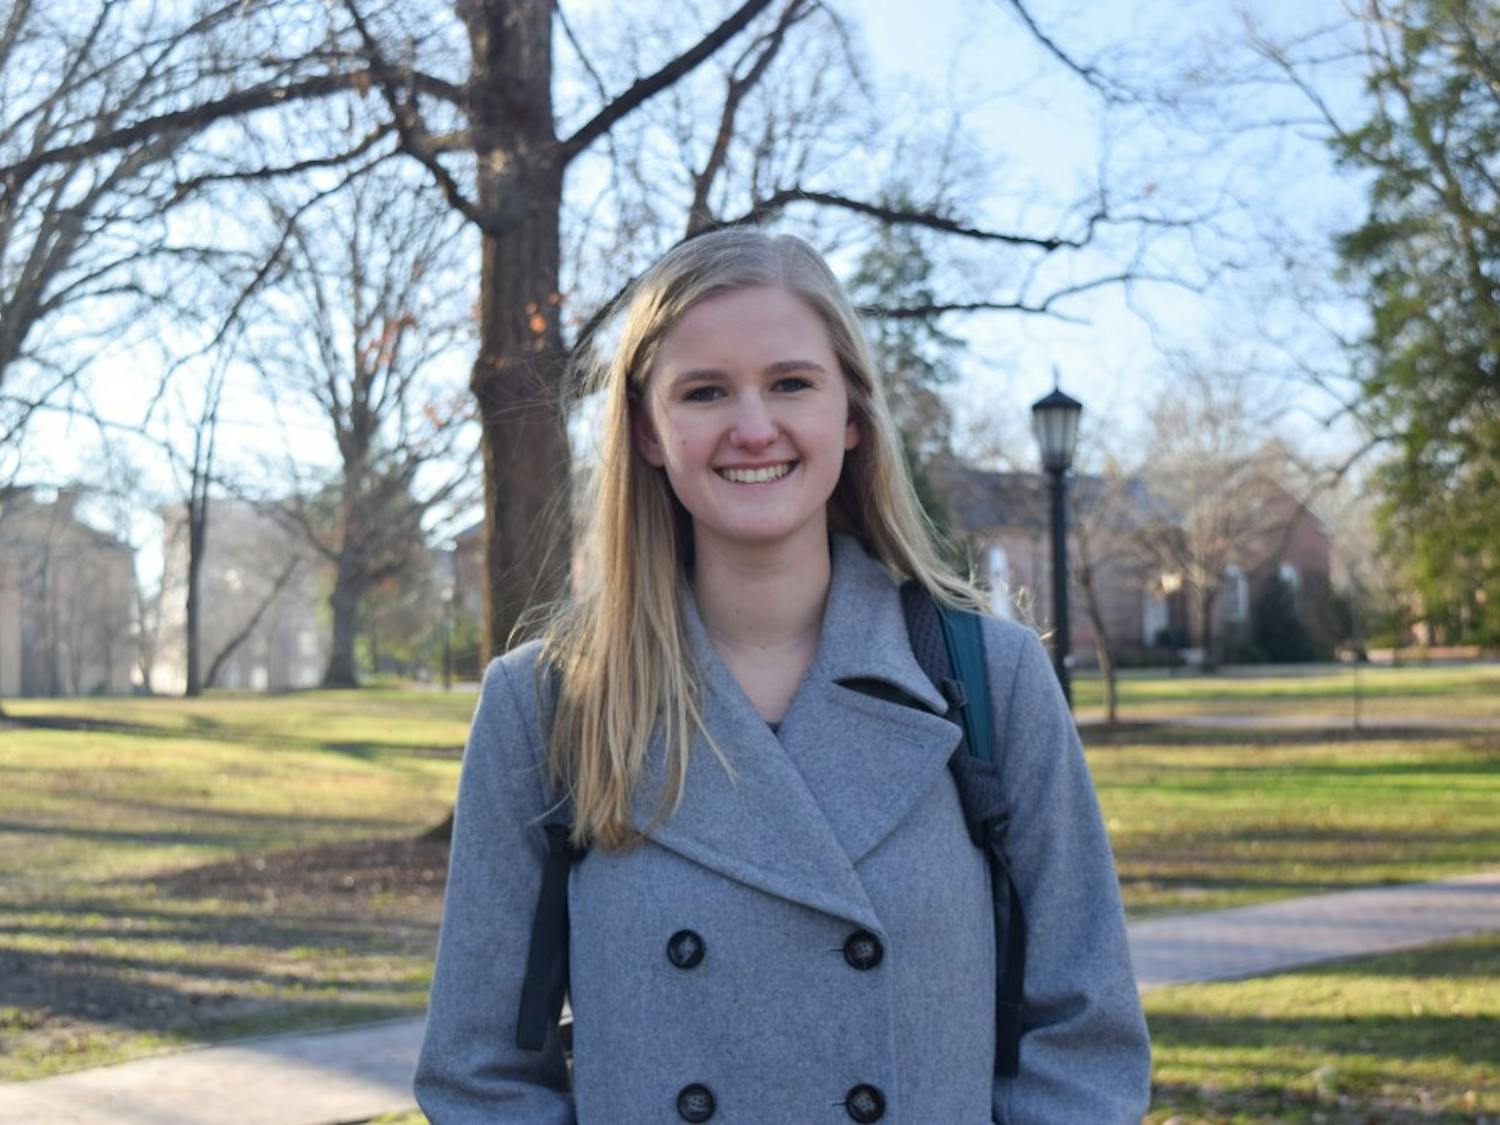 Valerie Lundeen, a third year studying Economics and Public Policy, is one of the many students affected by the partial government shutdown. Parents of many student are not able to go in to work for an uncertain period of time after Trump's decision to temporarily close down government functions.